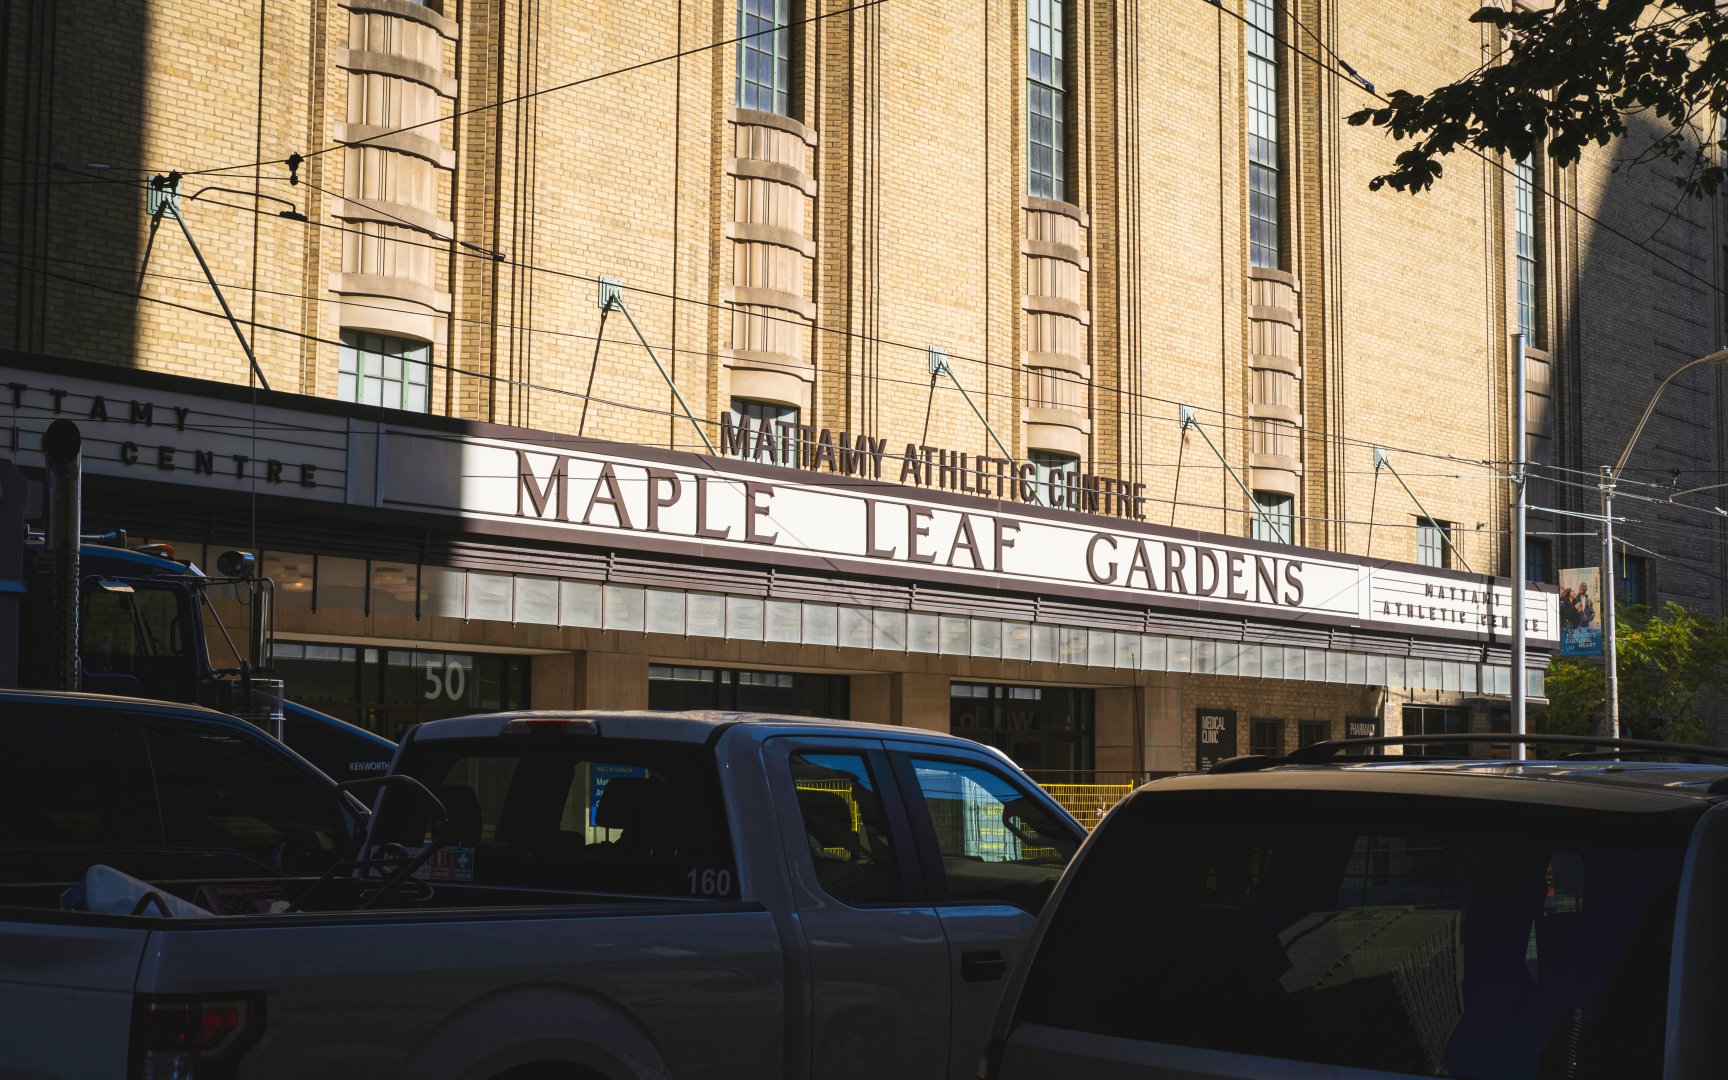 Maple Leaf Gardens (c) Photo by SHANE Maps exclusively for SHANE Maps